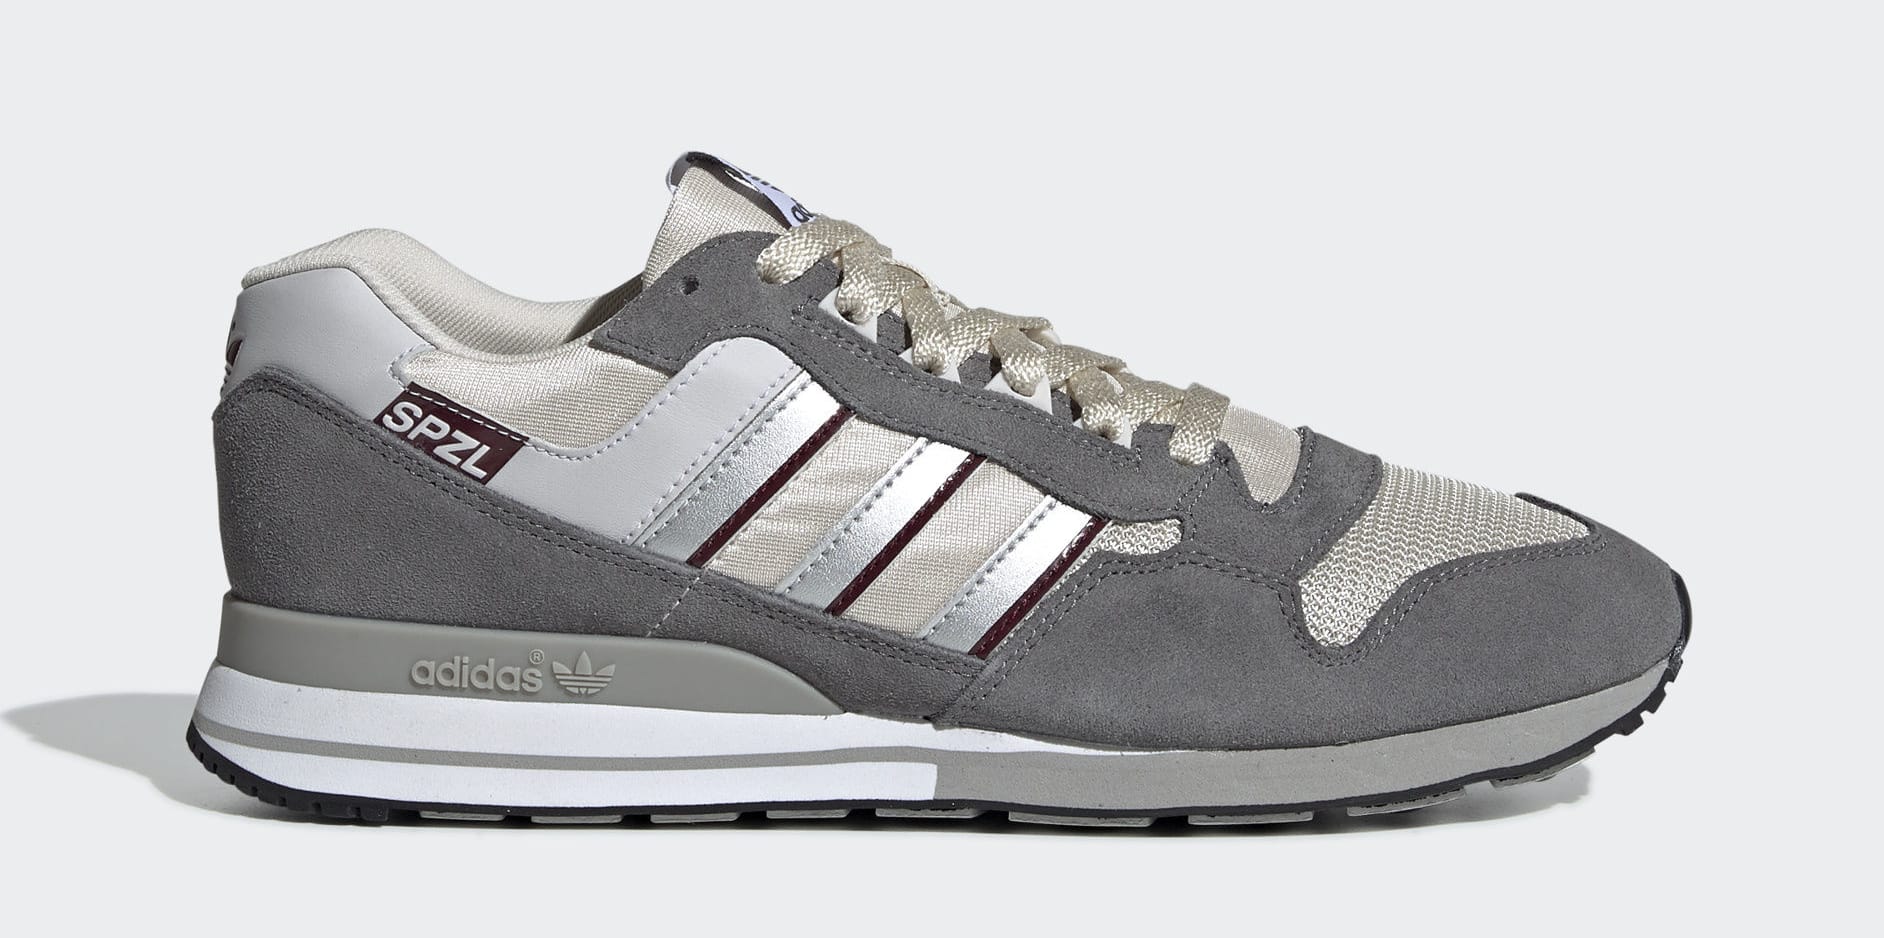 Adidas ZX 530 Spezial Lateral F35718